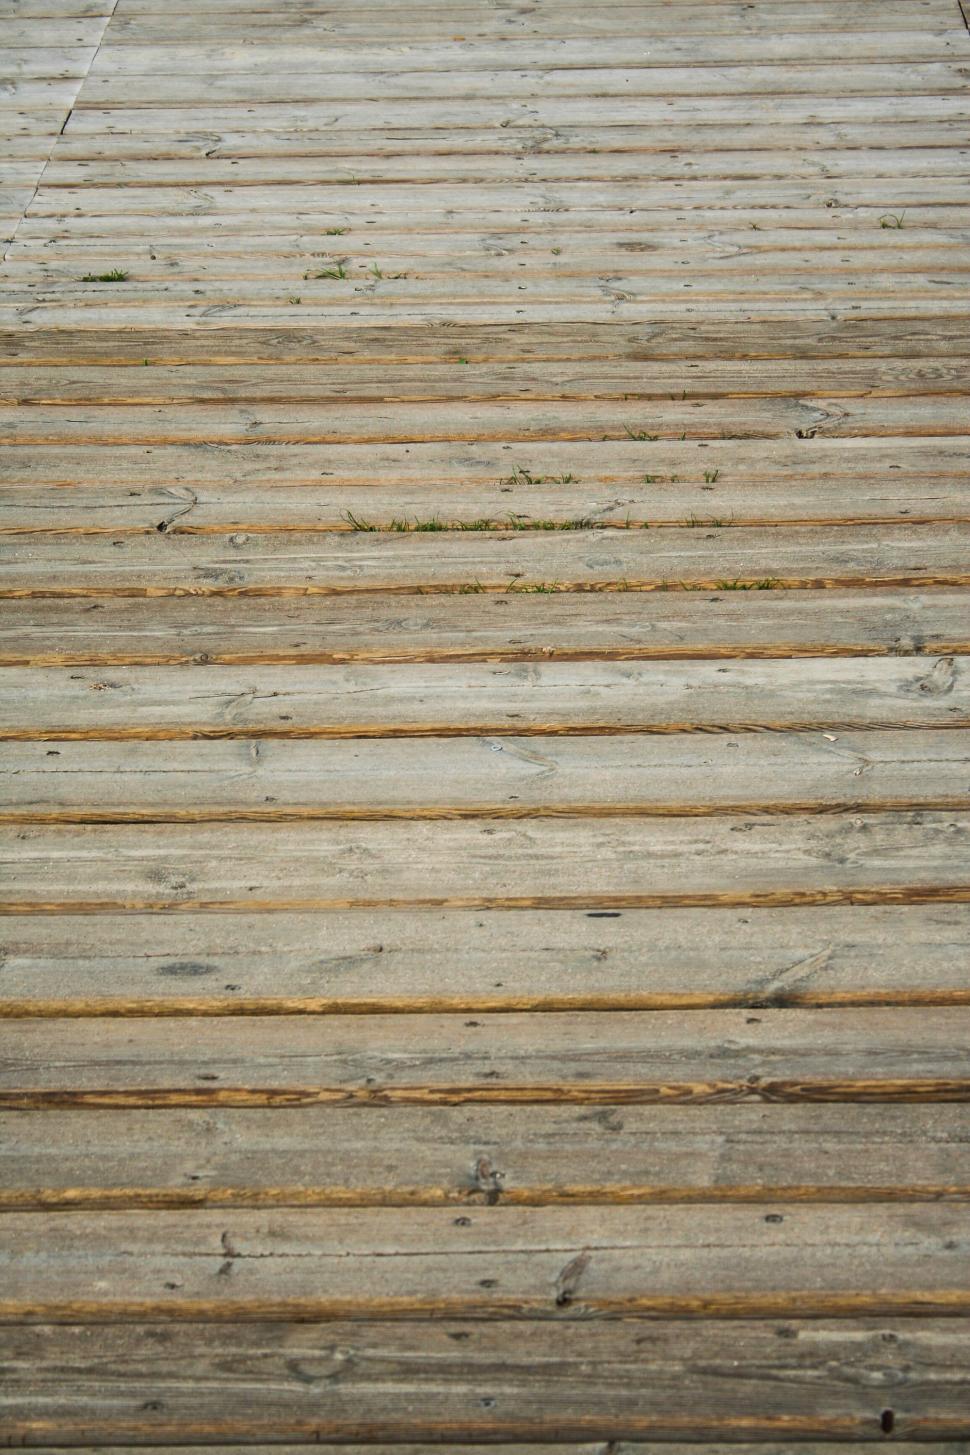 Free Image of texture material wood textured pattern pine surface brown rough old wall grunge timber wooden design backdrop panel bamboo close striped detail plank grain wallpaper natural construction weathered vintage 